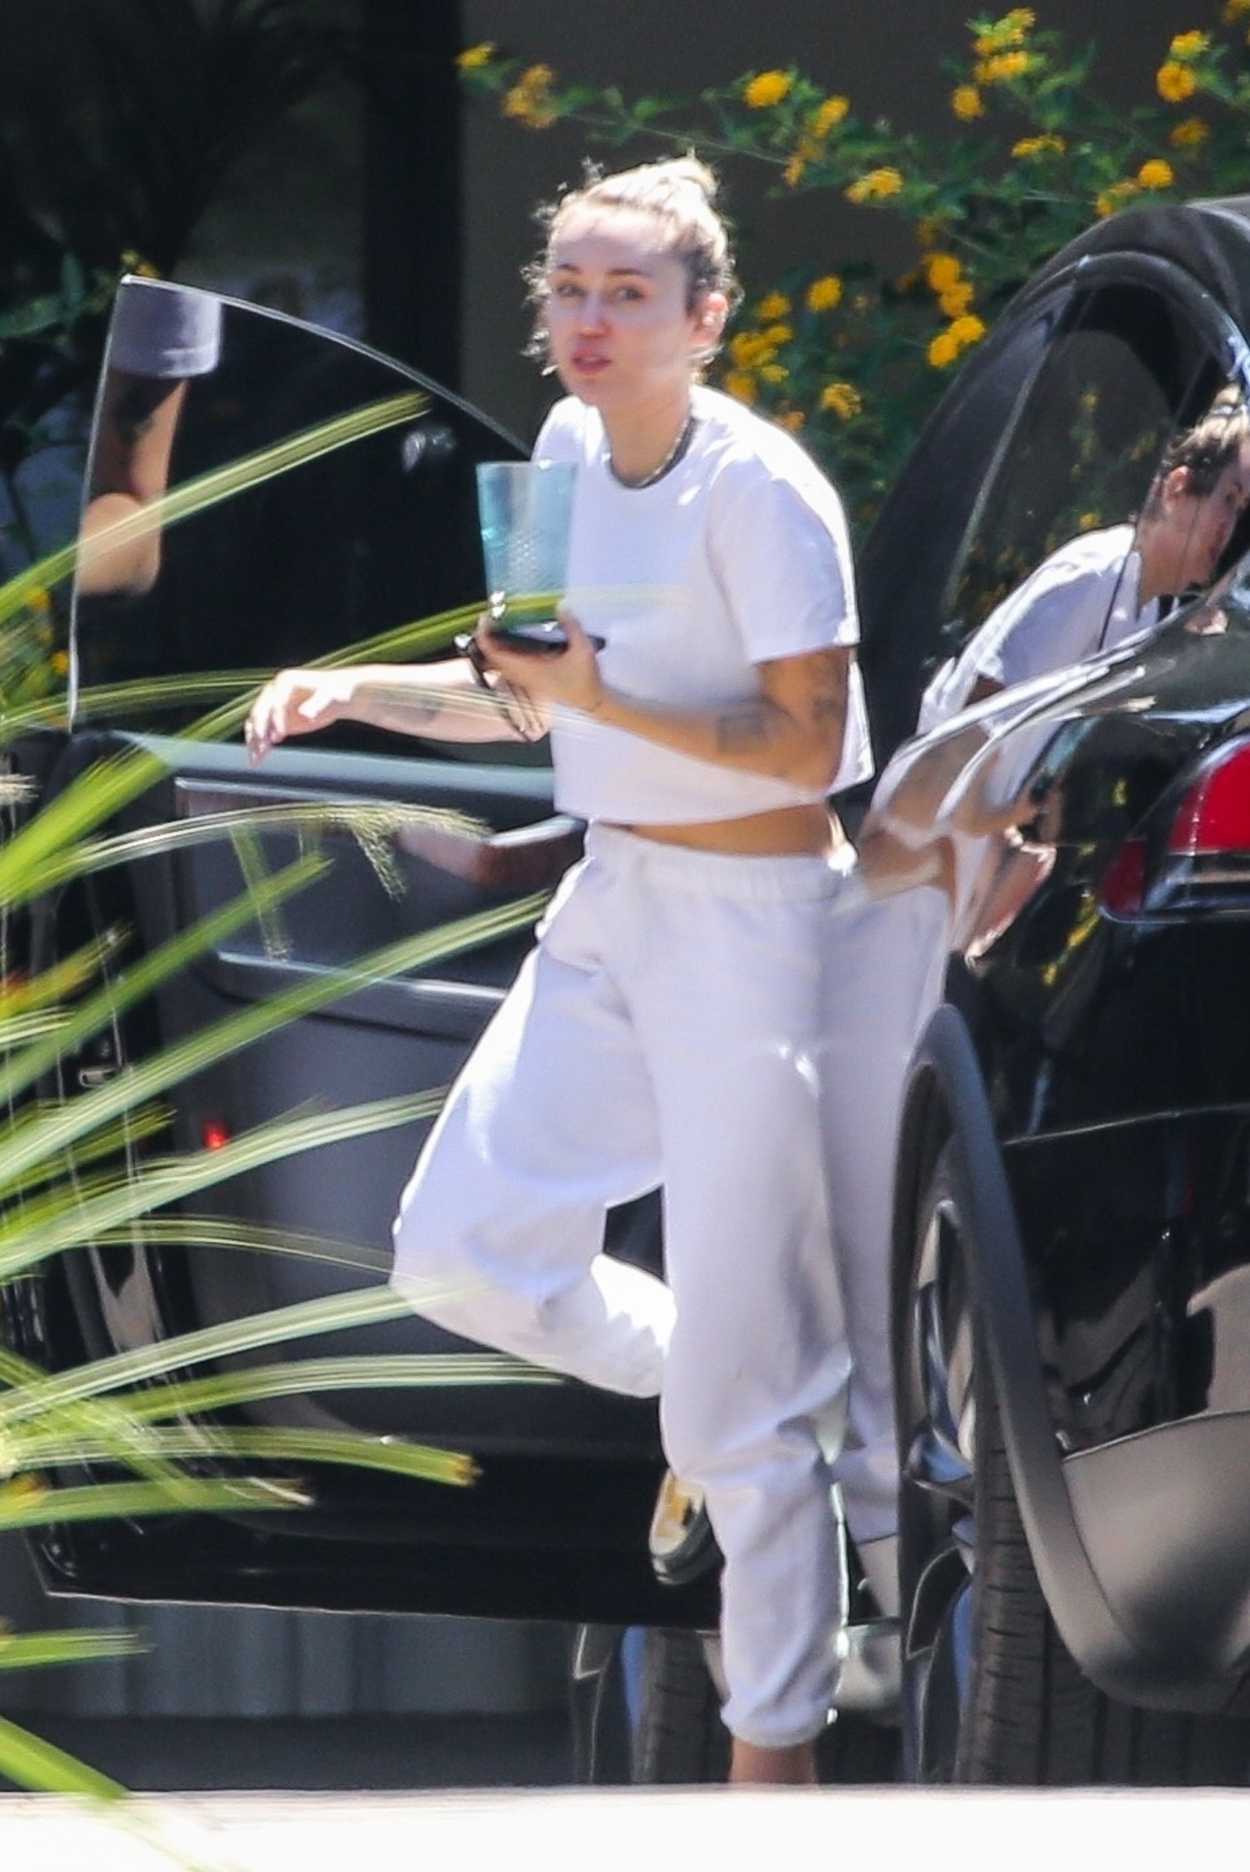 Miley Cyrus in a White Outfit